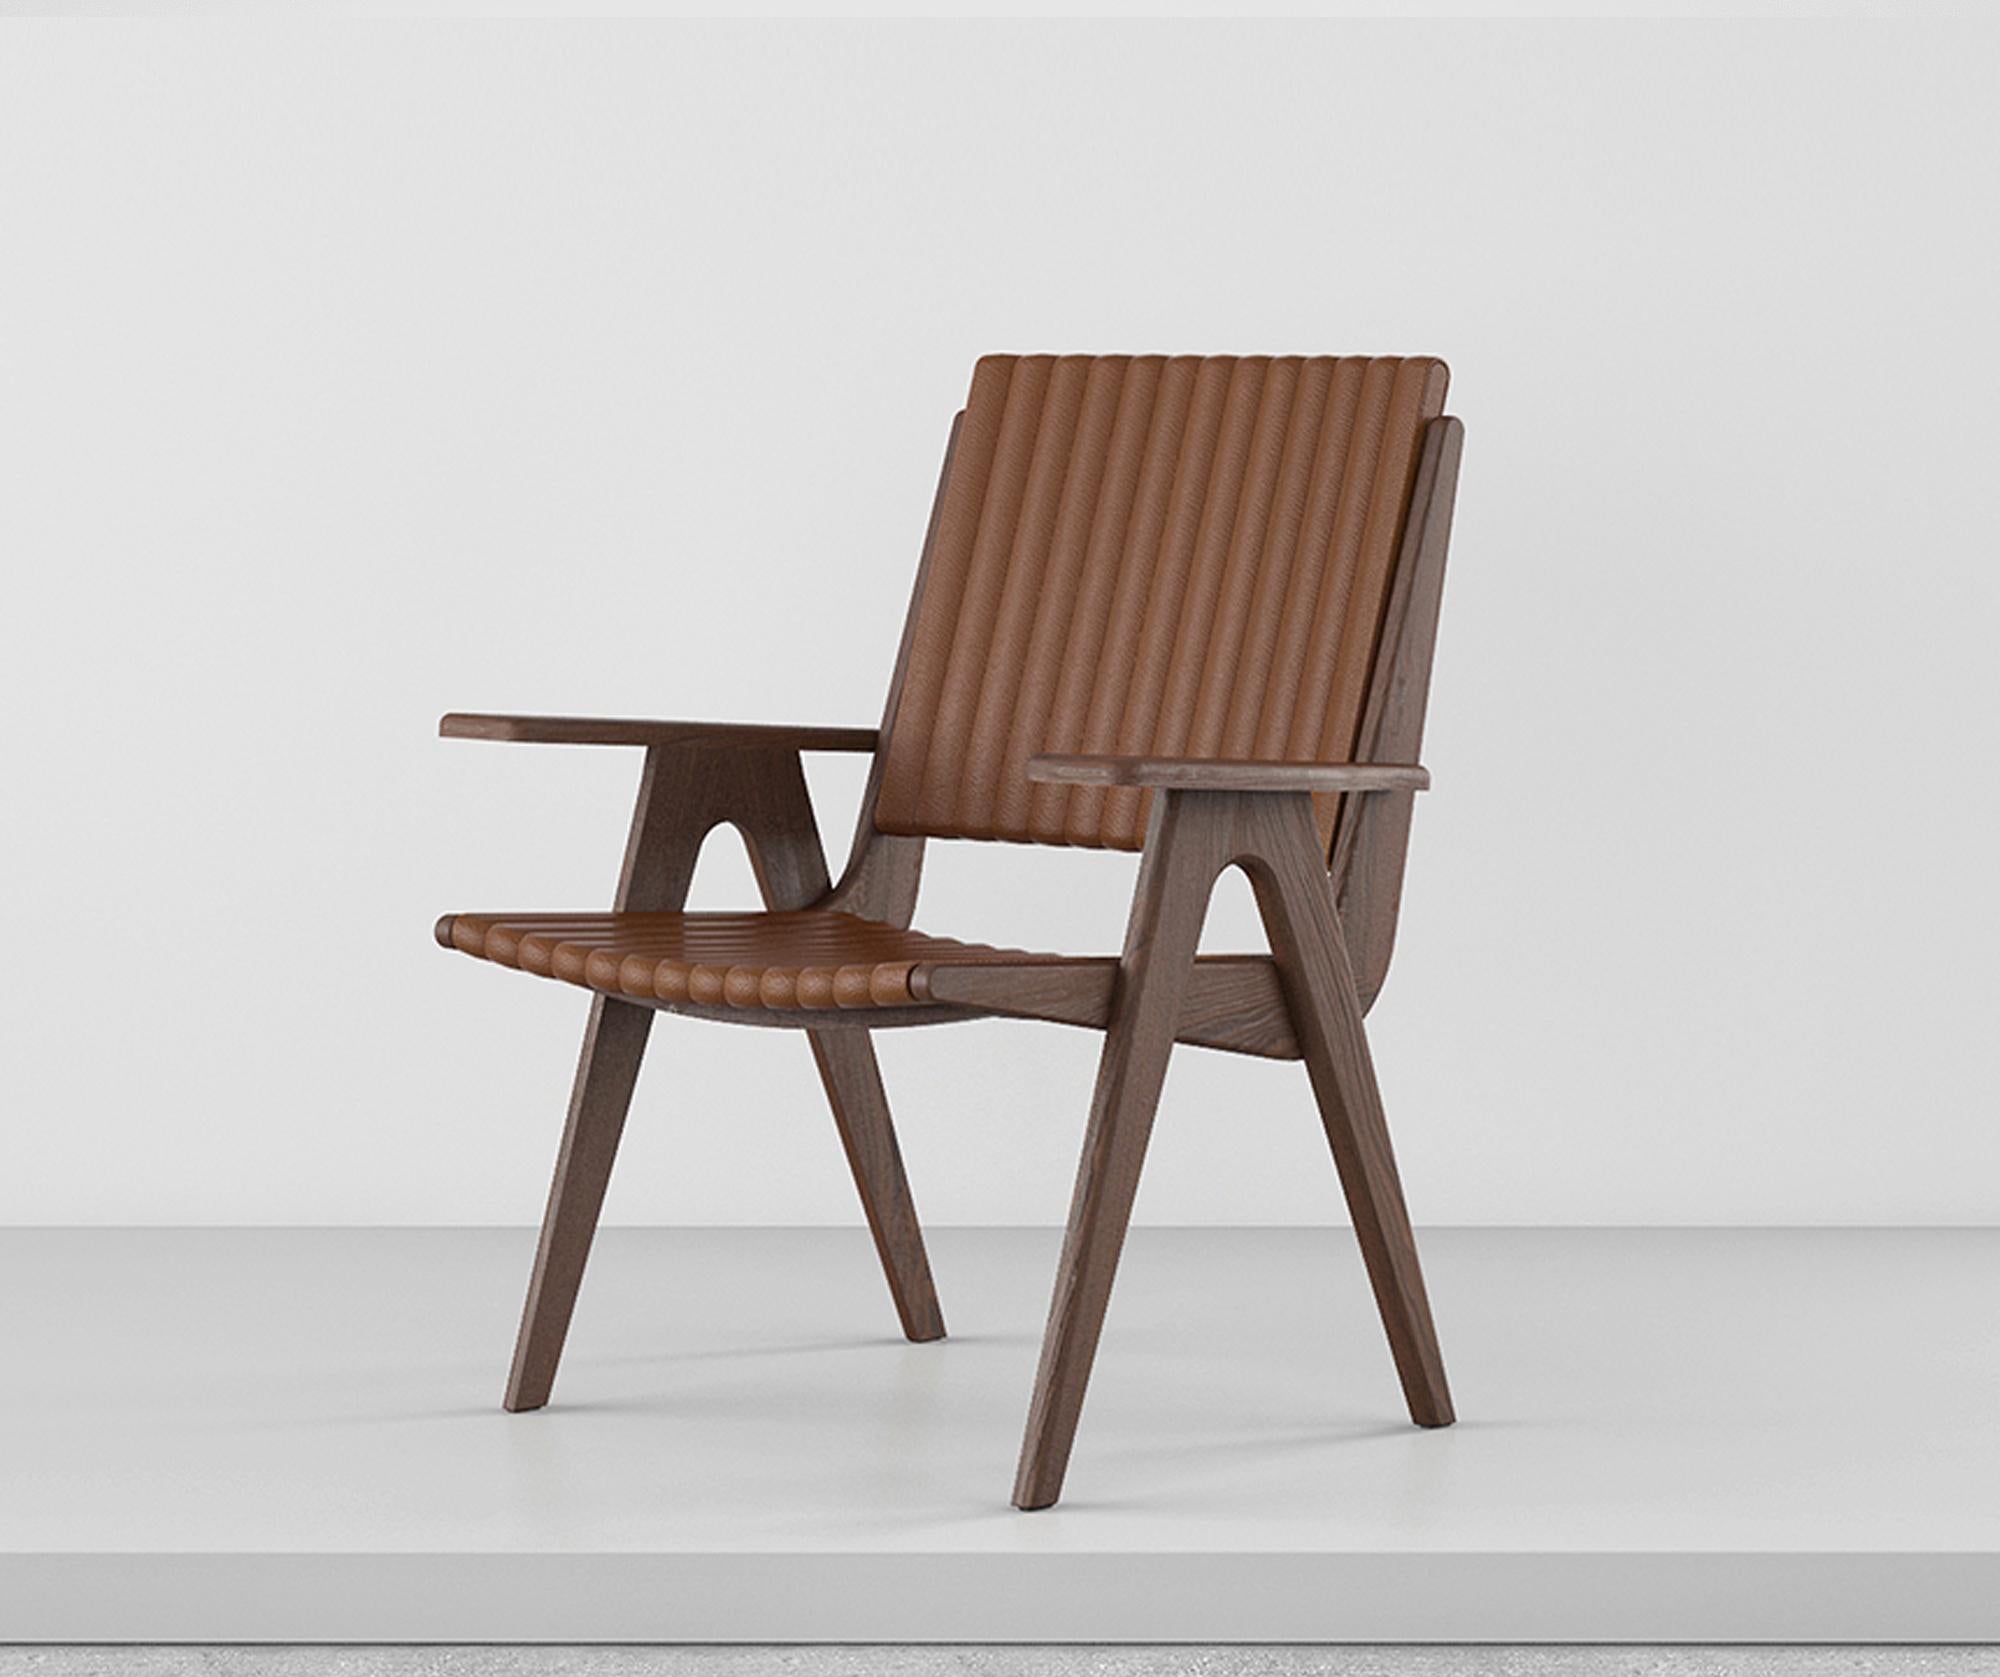 Slice is a contemporary reinterpretation of the wooden outdoor chairs that works very well at indoors as well. The chair is also available with upholstered seat and backrest, as well as having an armless sibling.